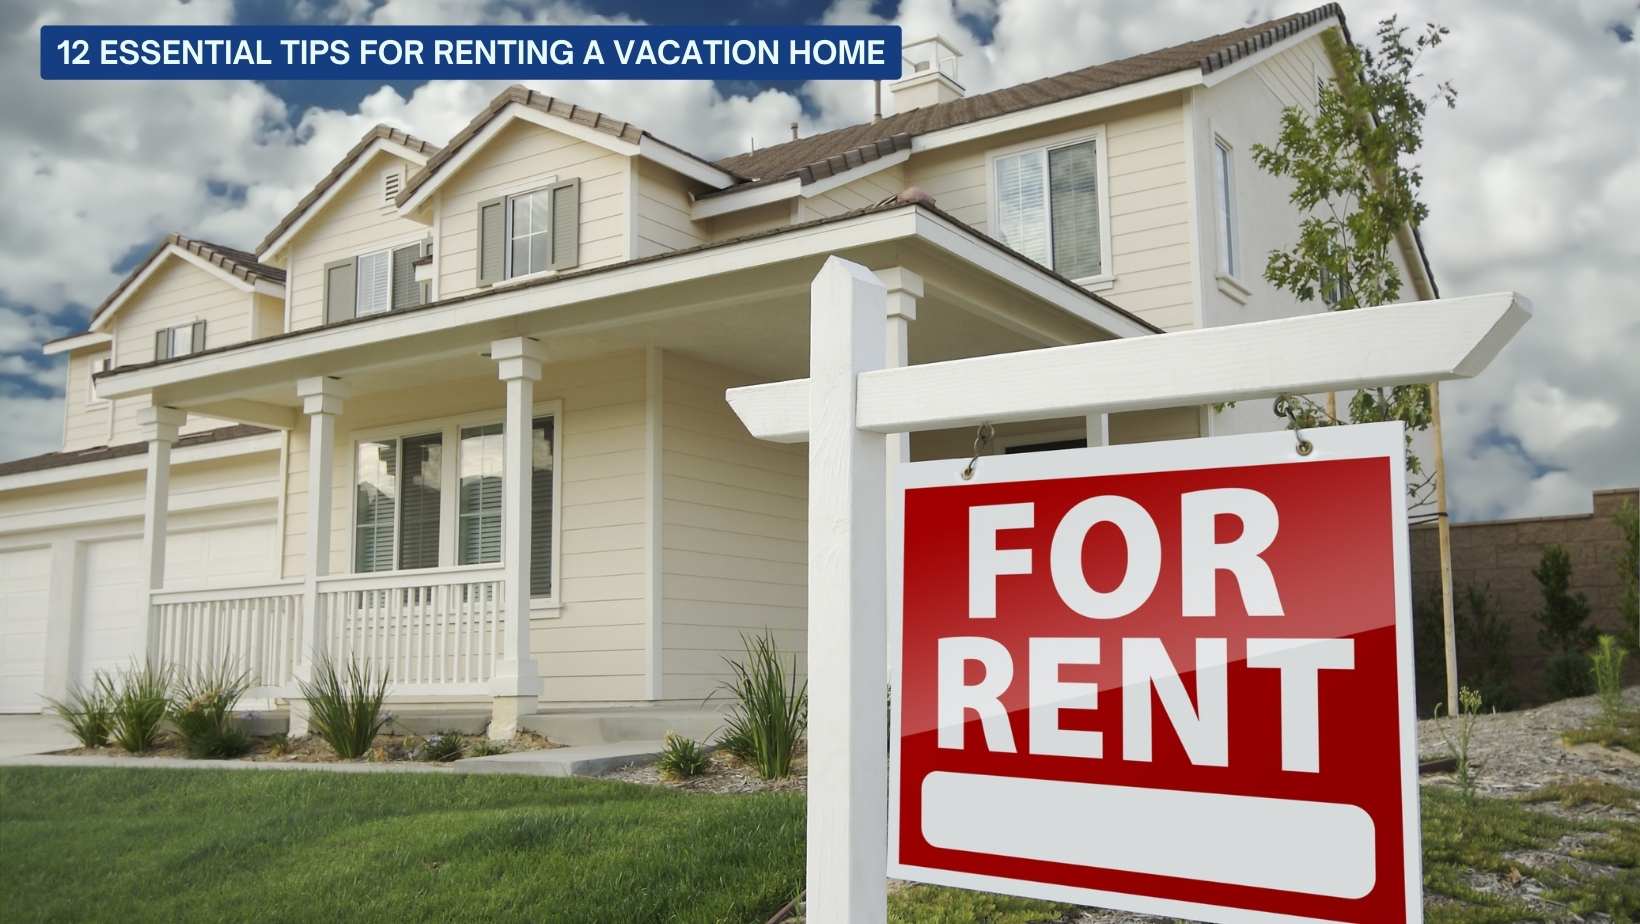 12 Essential Tips for Renting a Vacation Home